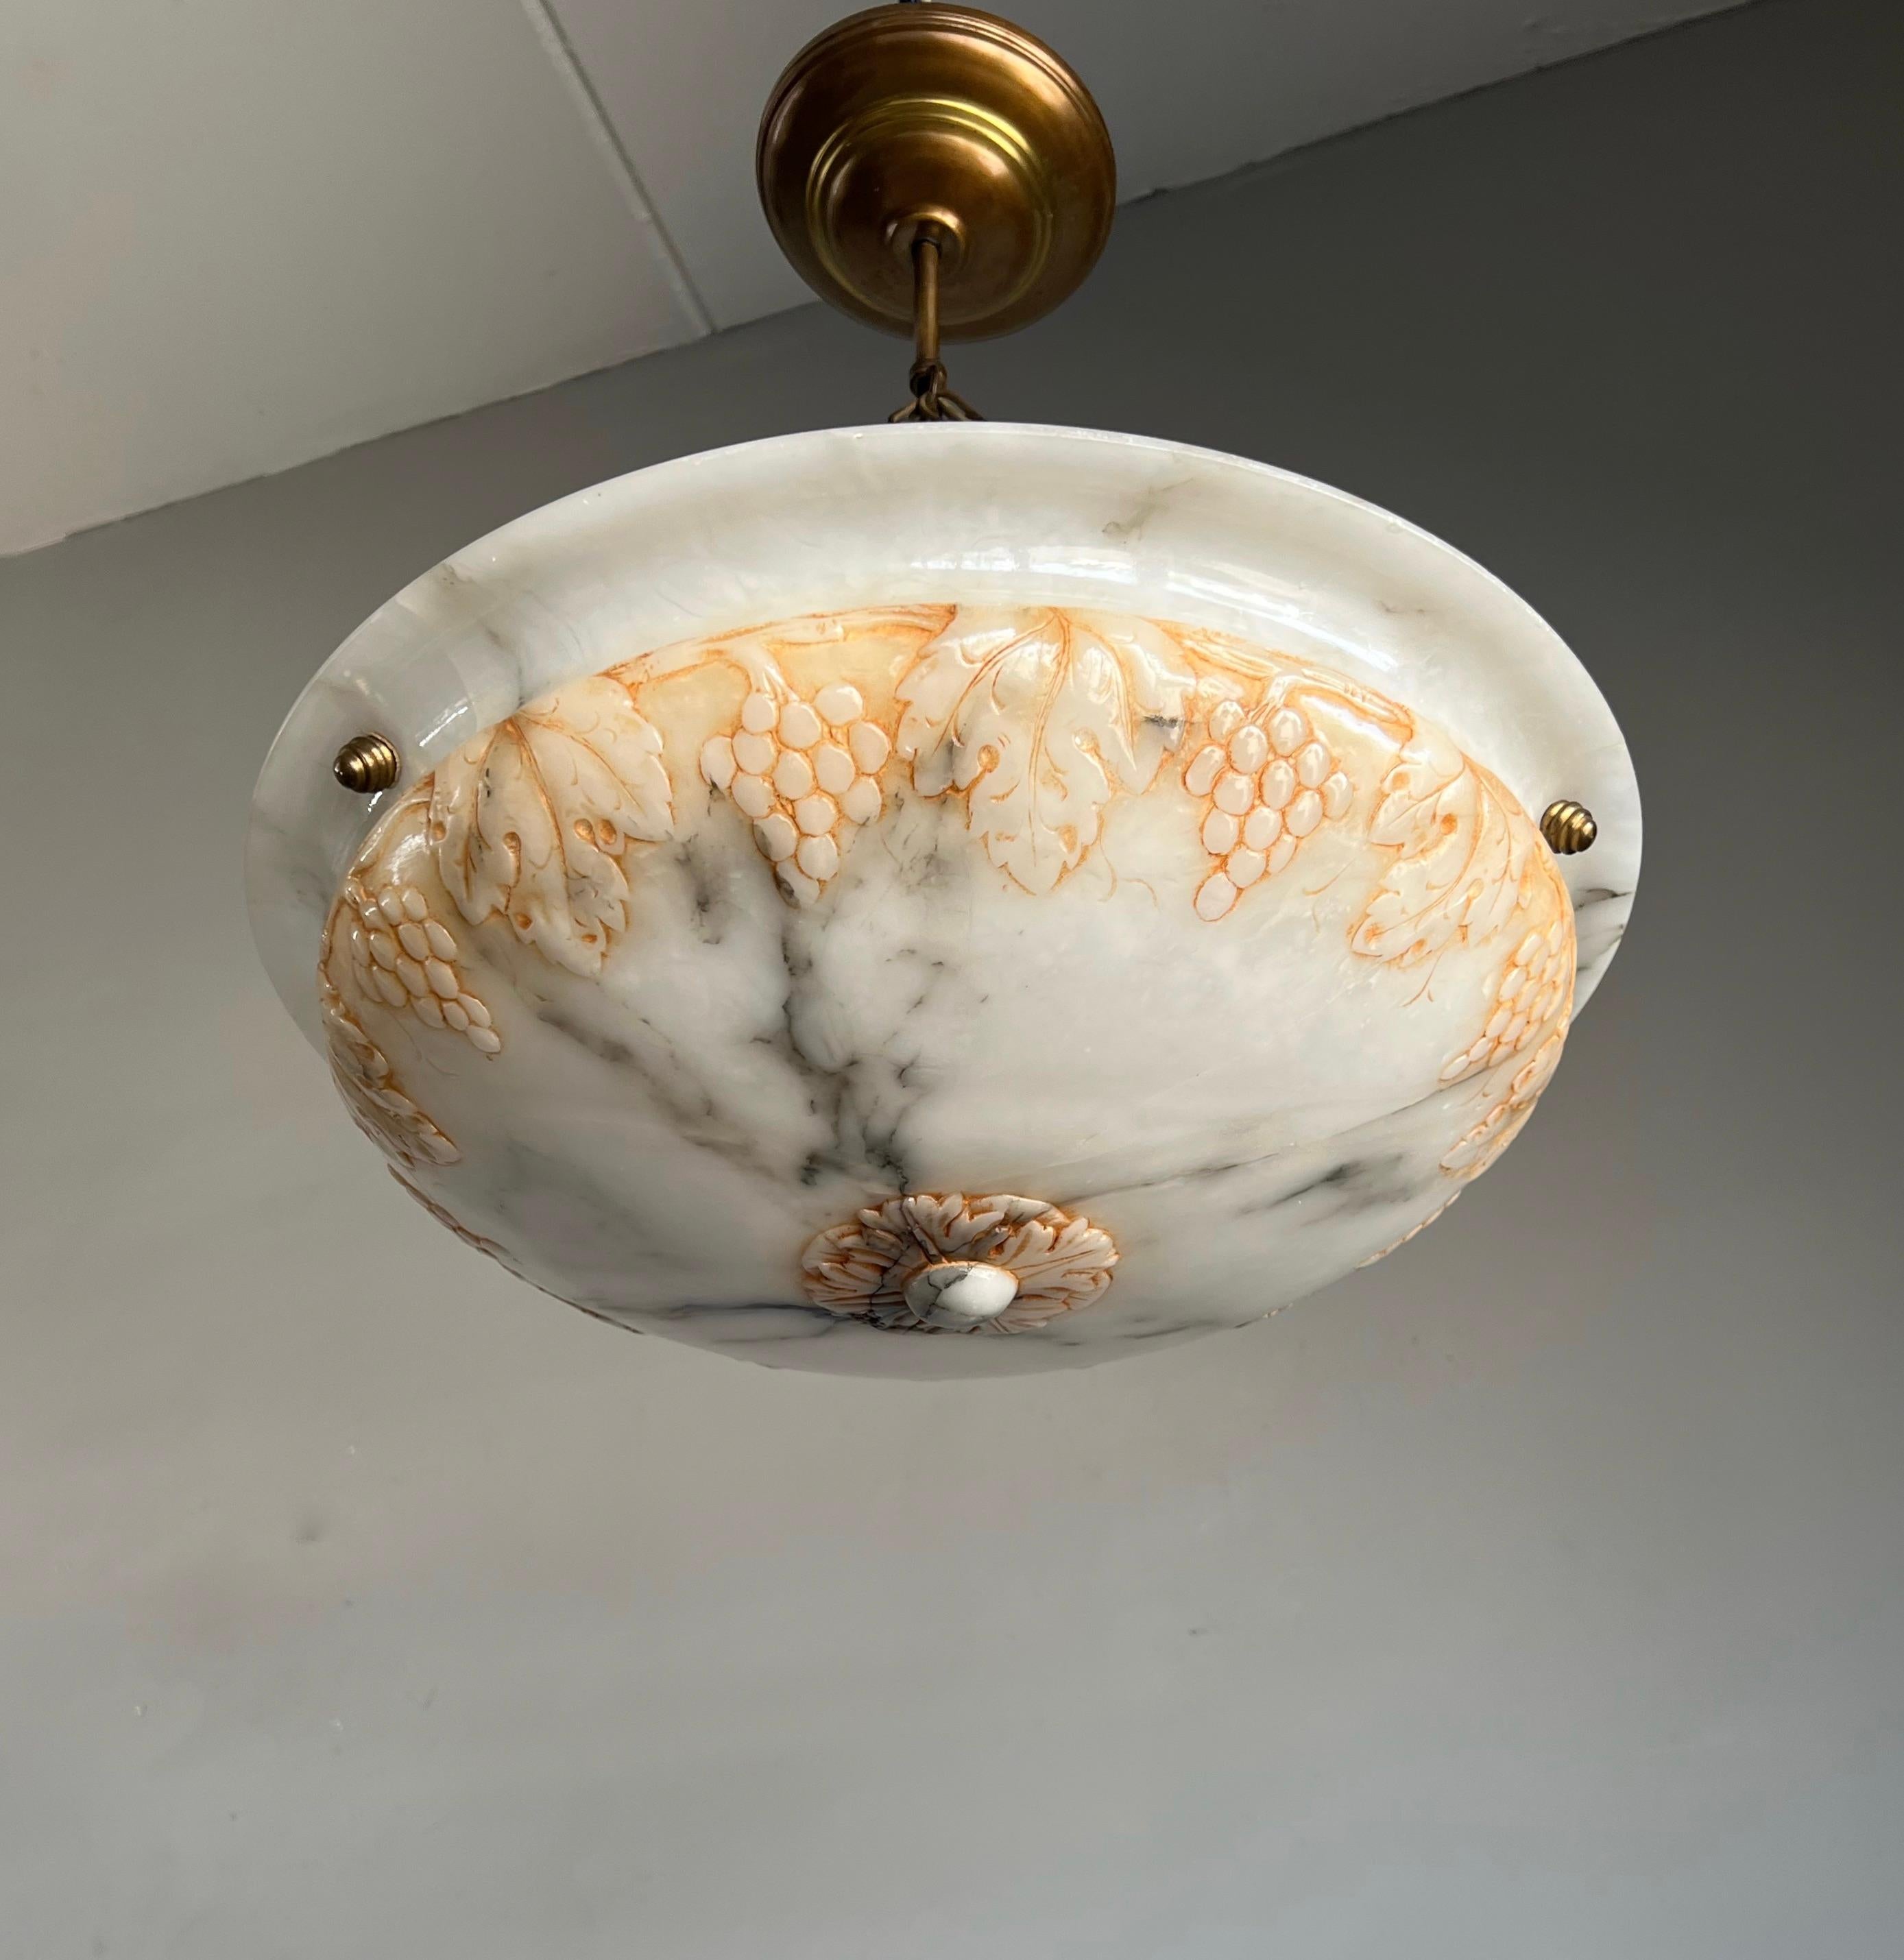 Unique alabaster shade with carved grapes bunches & leafs and perfect brass canopy.

Thanks to its good size, its unique handcarved design and good condition this alabaster chandelier too will light up both your days and evenings. What makes this